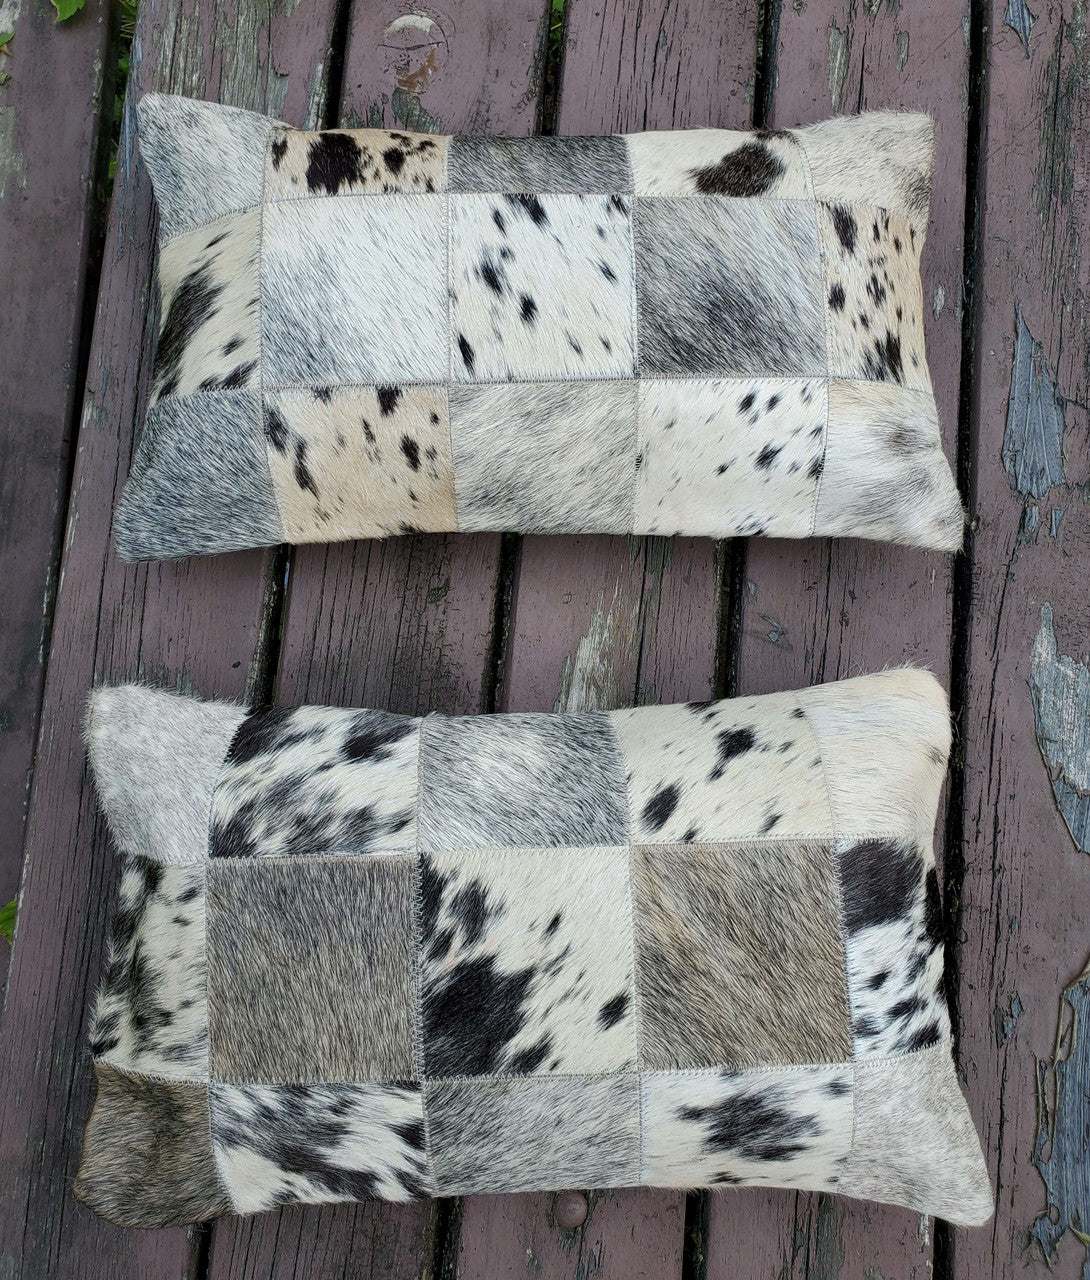 Beautiful cowhide pillows Canada and very well made. Great communication from seller too. 

